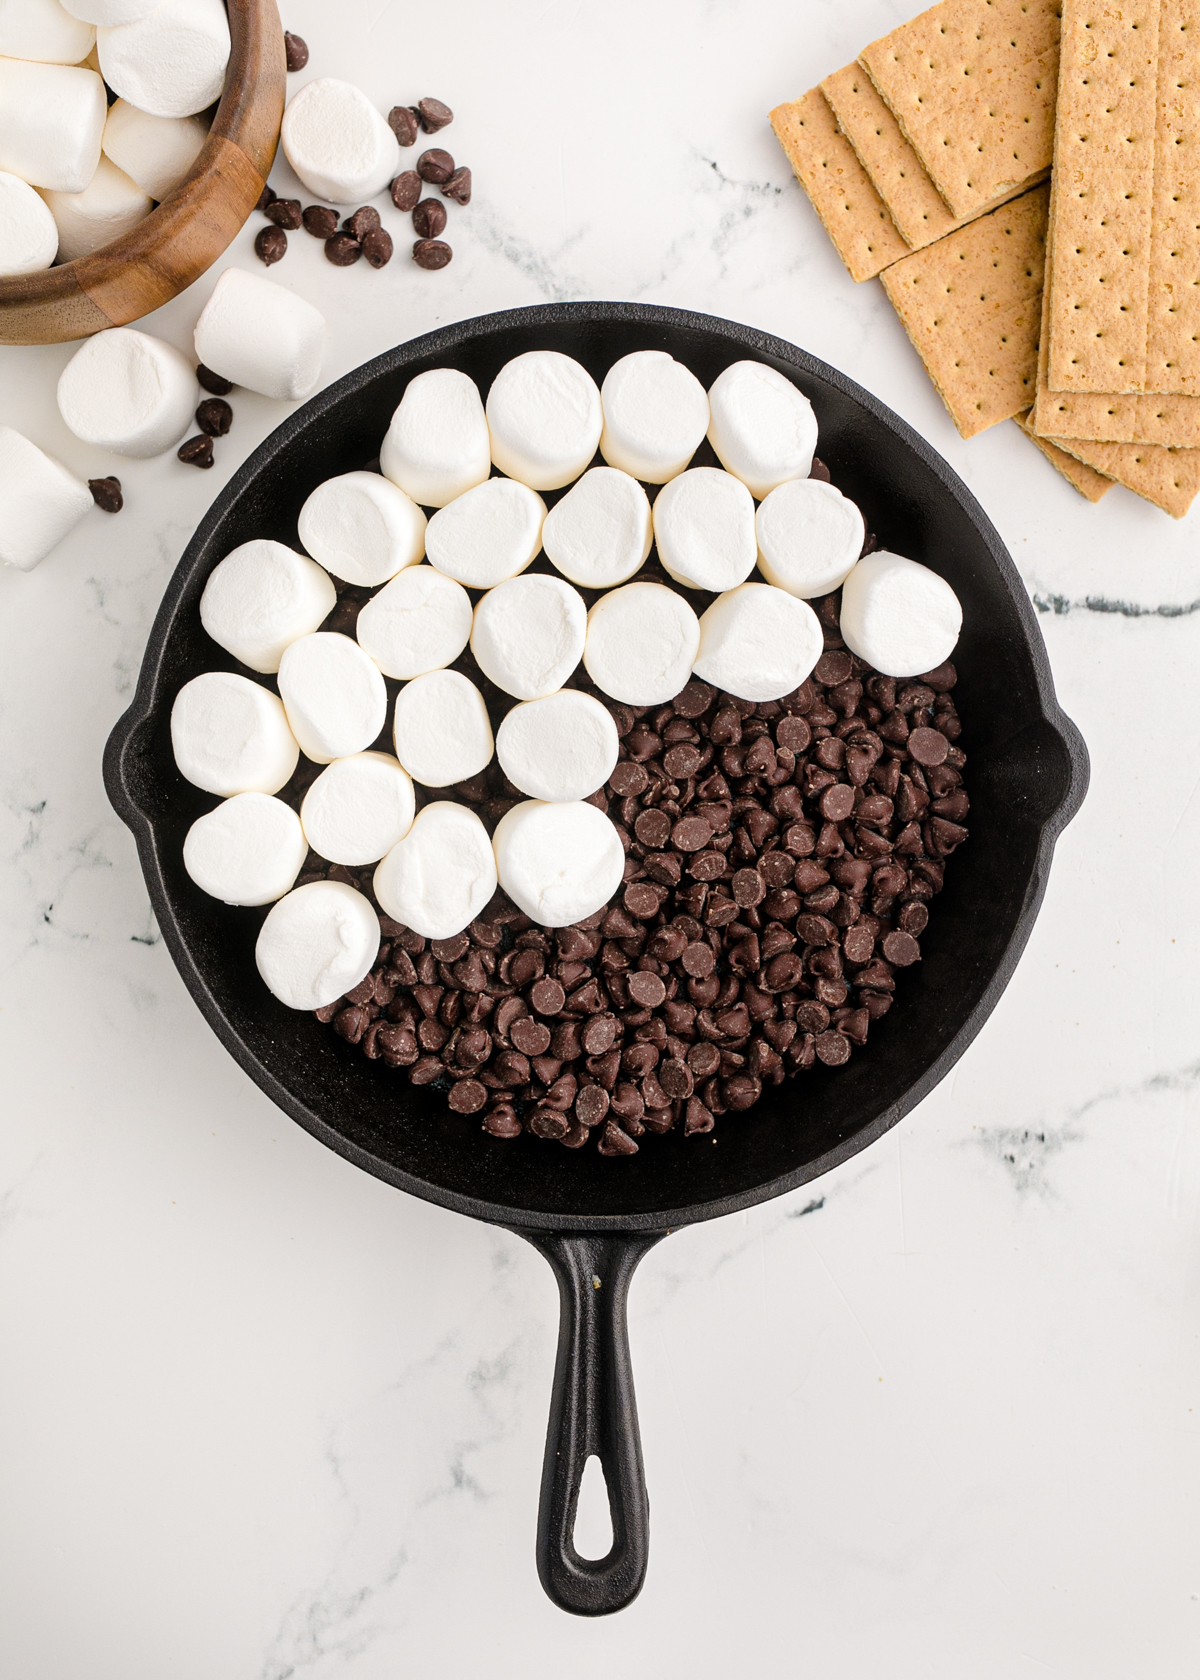 marshmallows on top of chocolate in a cast iron skillet